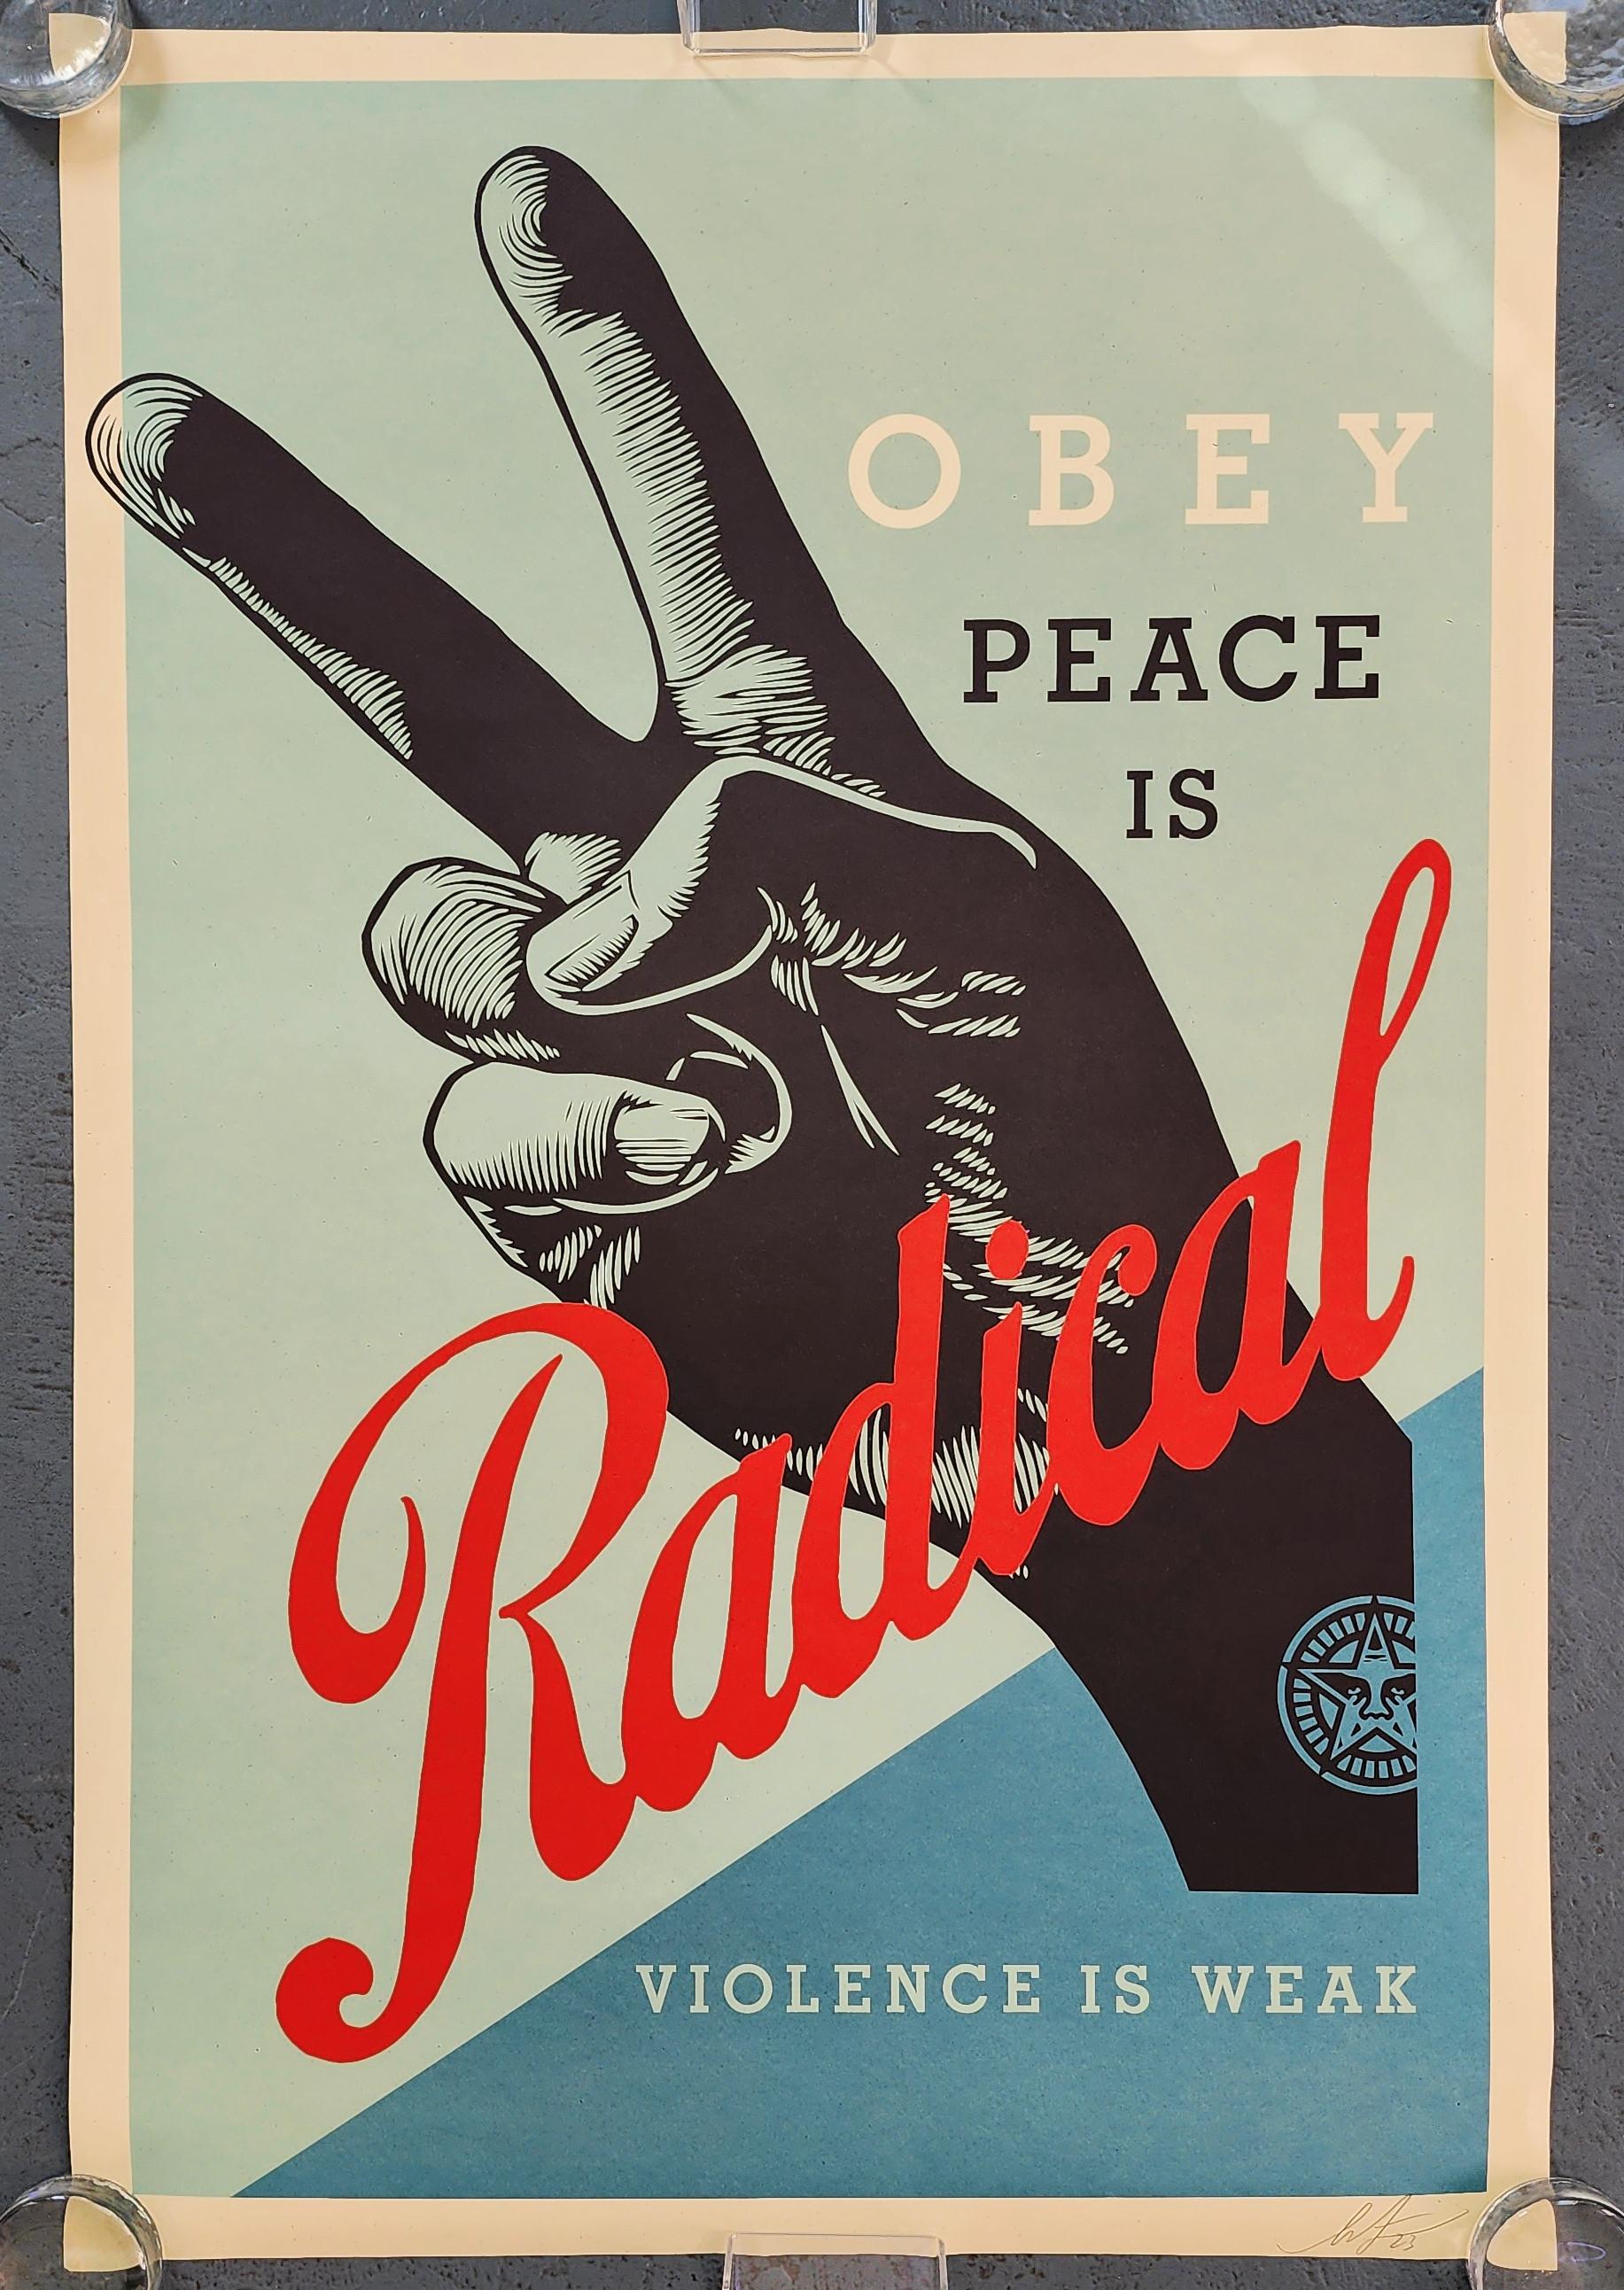 Shepard Fairey
Radical Peace (Diplomacy, Creativity, Mutual Benefit, Defending Rights and Dissent)
Offset Lithograph on thick cream Speckletone paper
Year: 2023-2024
Size: 36x24 inches
Signed, dated by hand
COA provided
Ref.: 924802-1794

Tags: